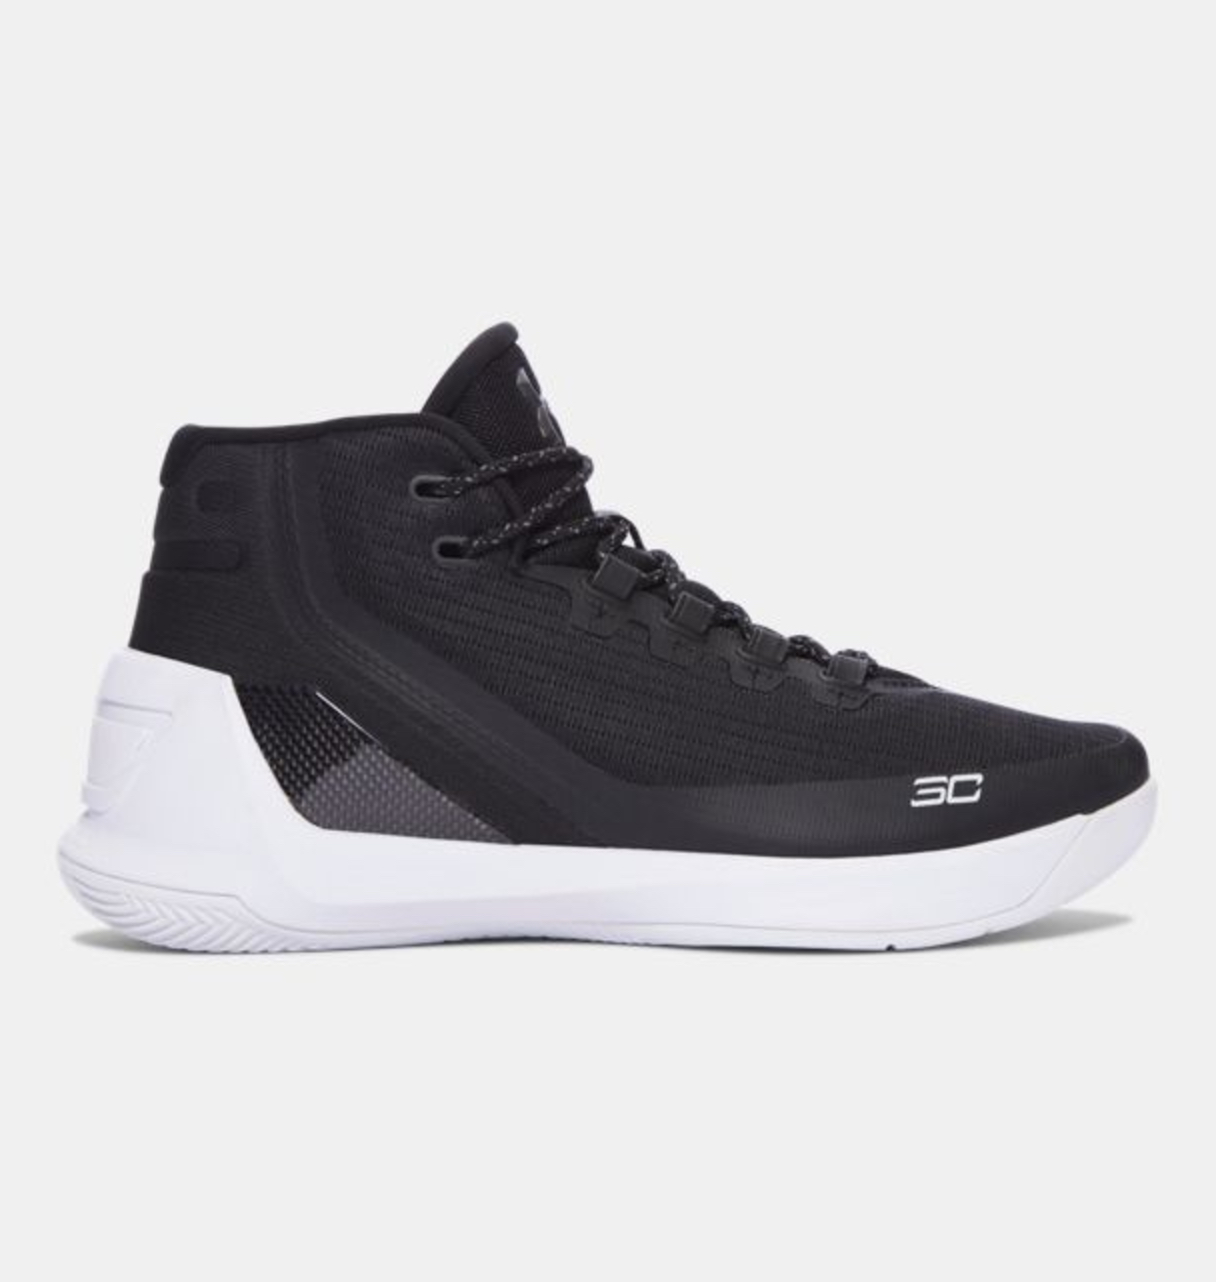 A Black and White Curry 3 is Nearly 